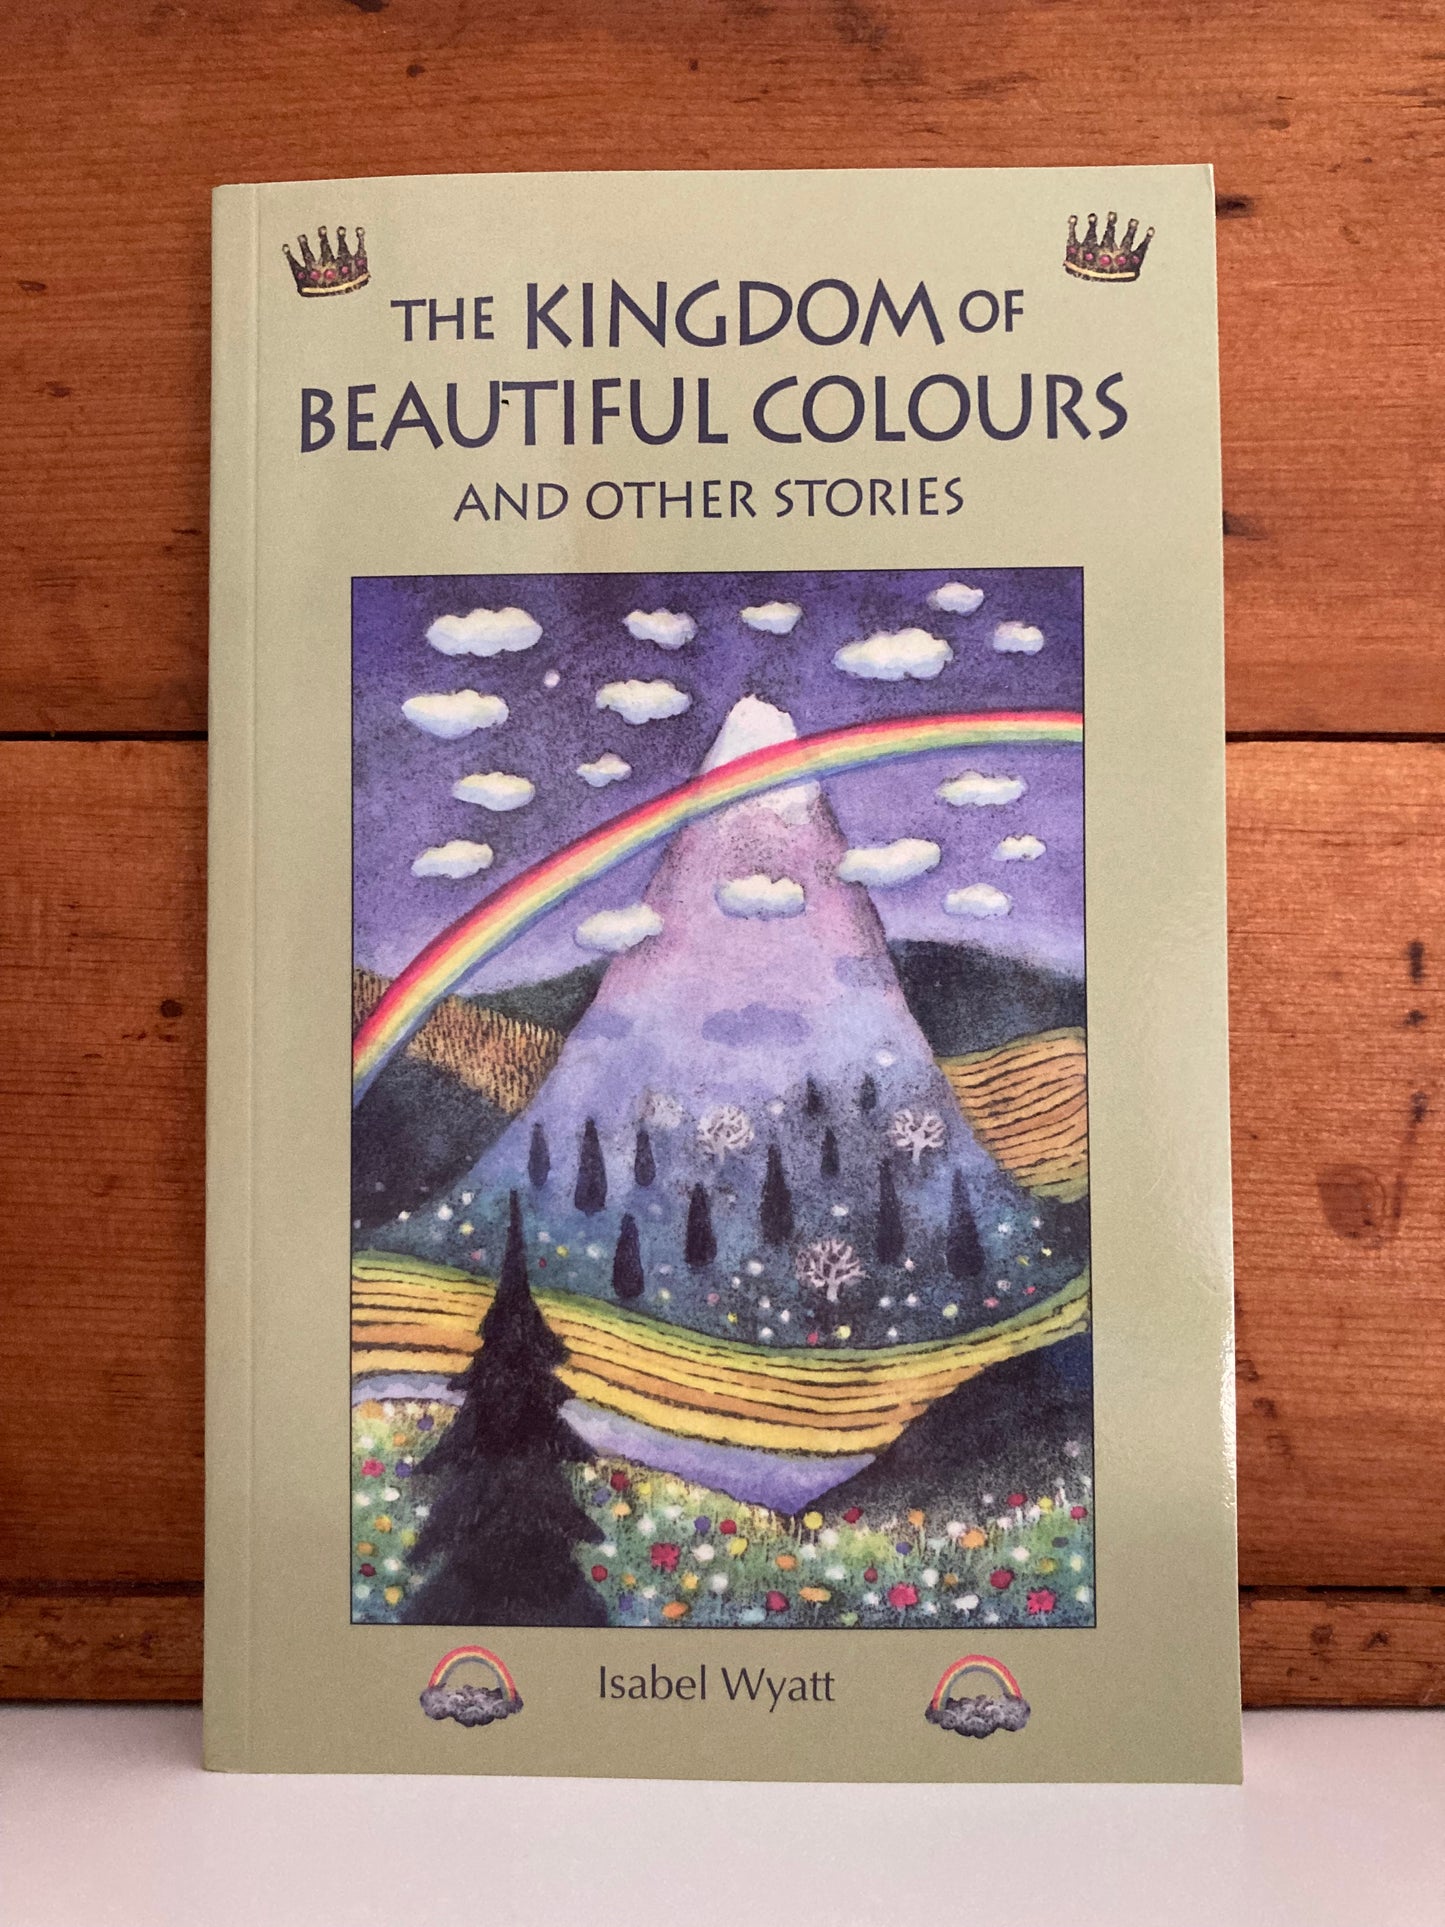 Chapter Book for Young Readers - THE KINGDOM OF BEAUTIFUL COLOURS